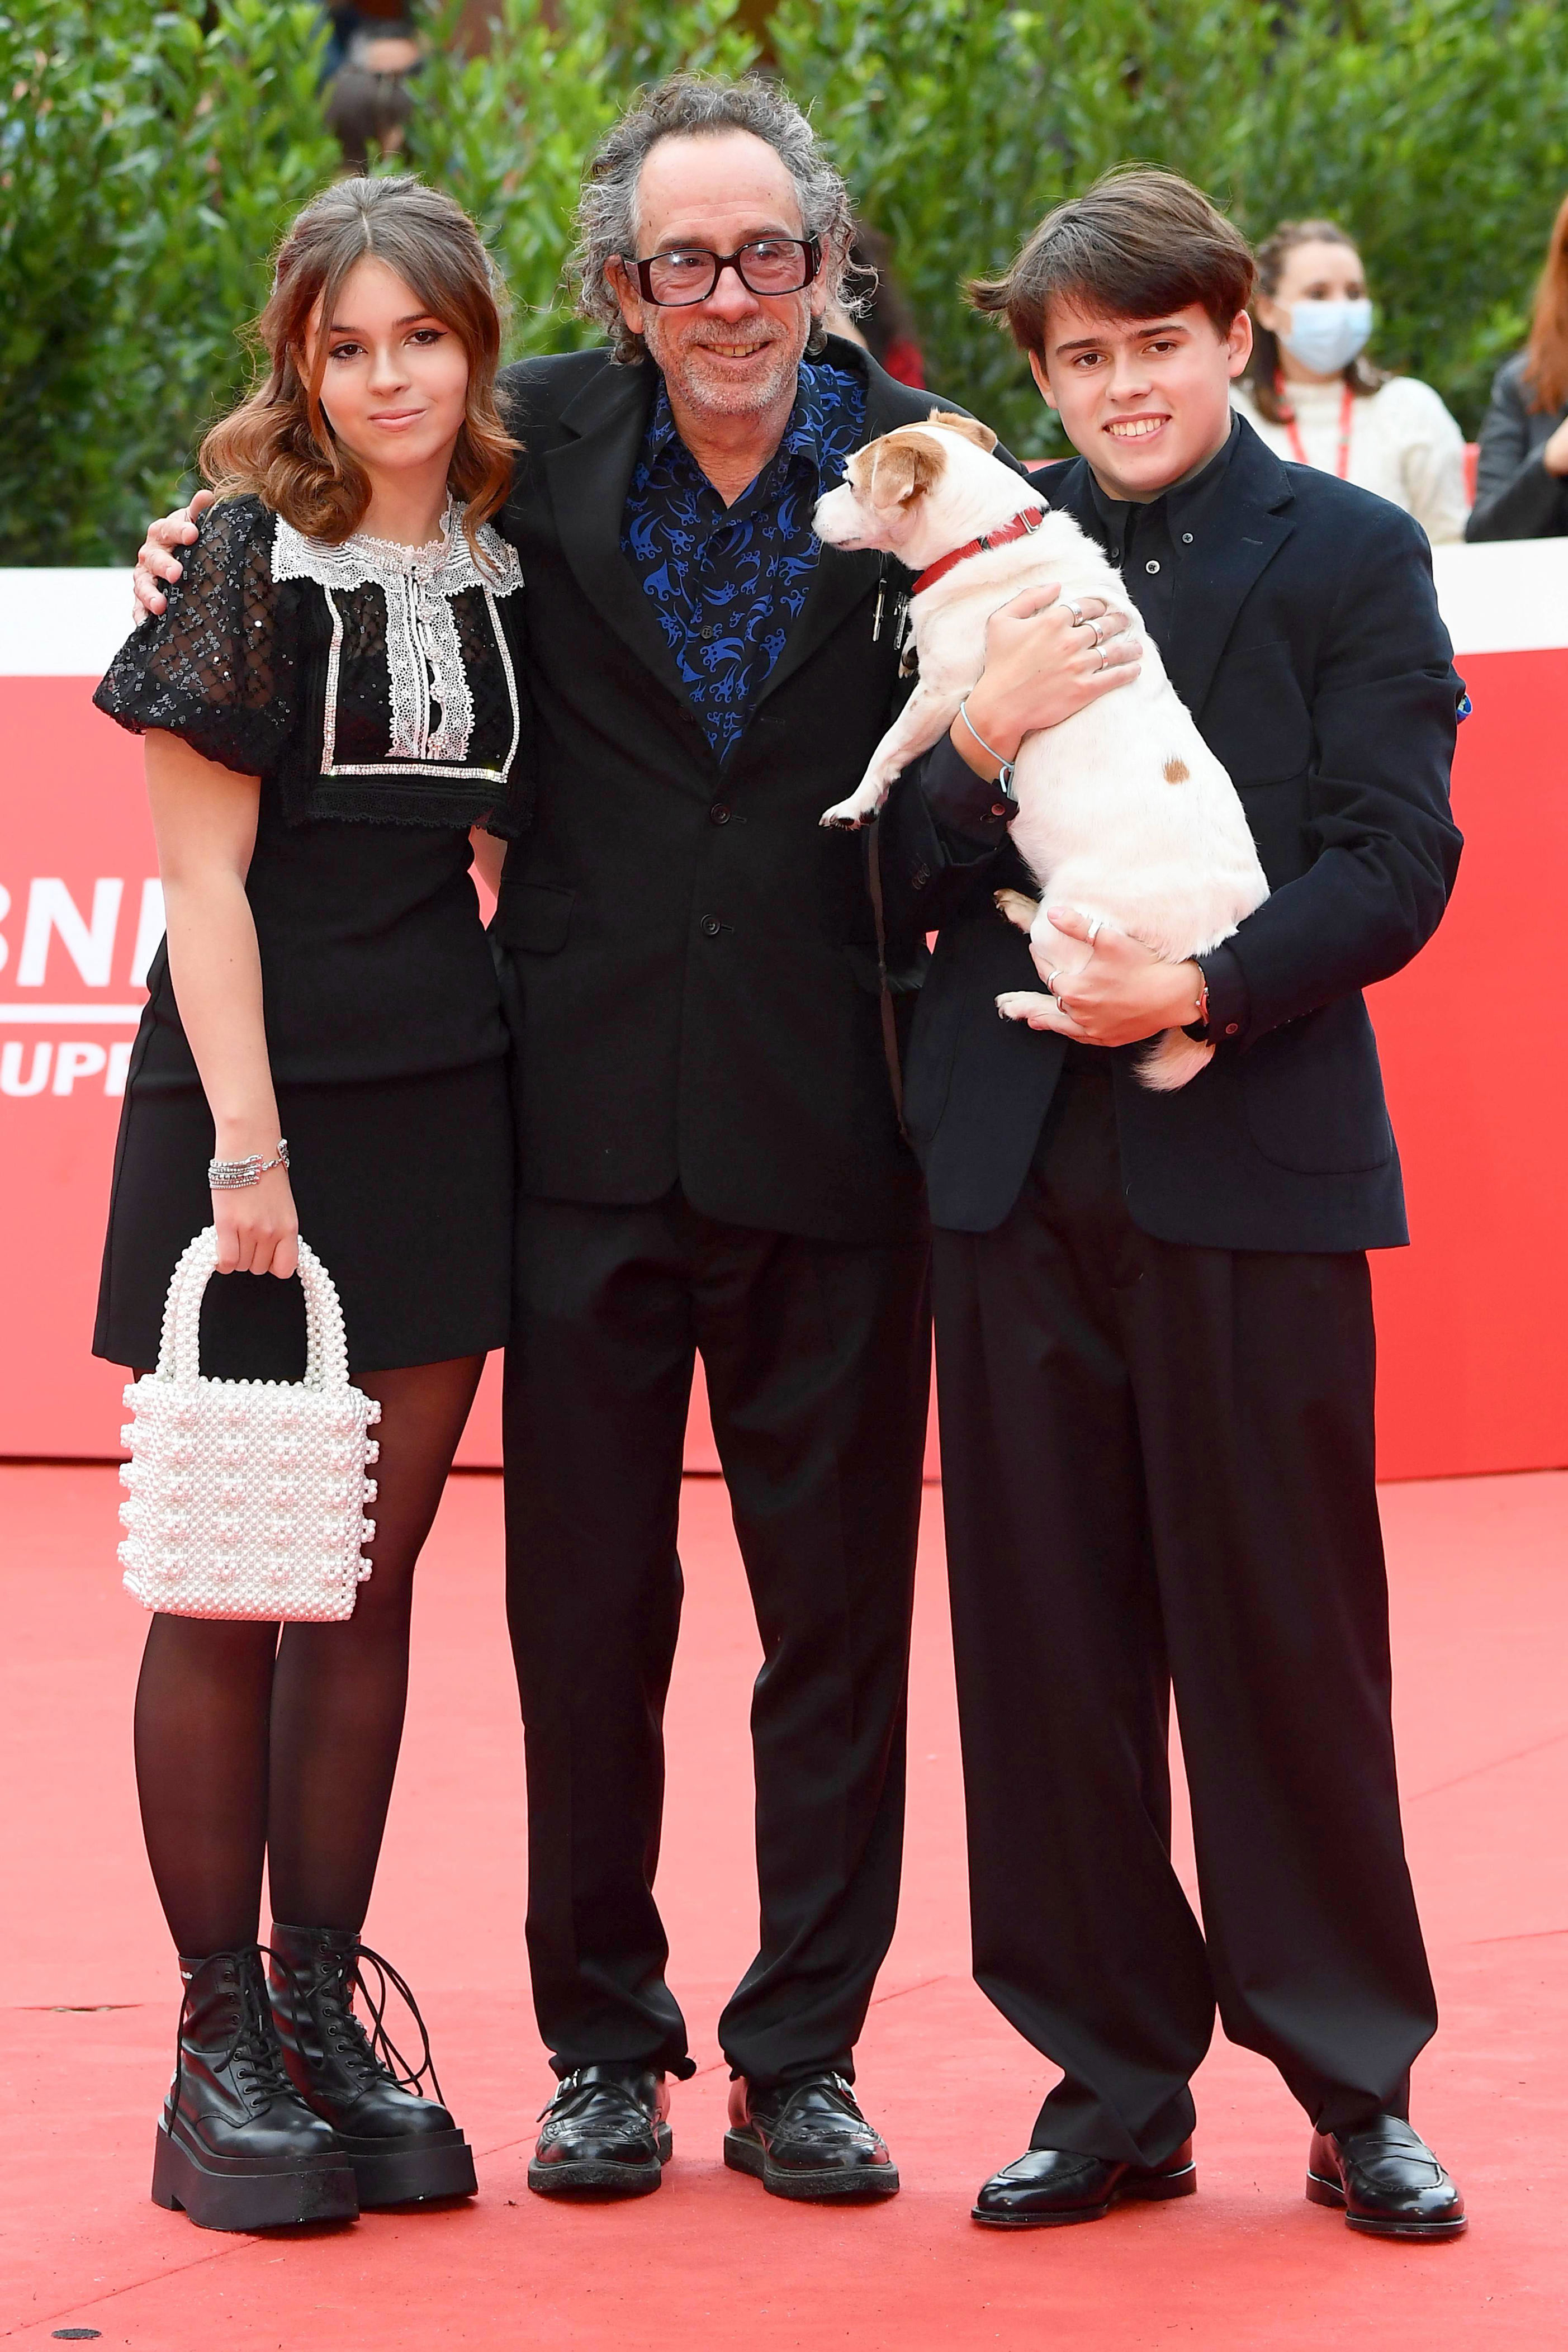 <p>Tim Burton and kids Nell Burton (who was born in 2007) and Billy Burton (who was born in 2003) and their dog, Levi, hit the red carpet to celebrate the filmmaker's Tim Burton Lifetime Achievement Award during the Rome Film Festival in Italy on Oct. 23, 2021.</p>